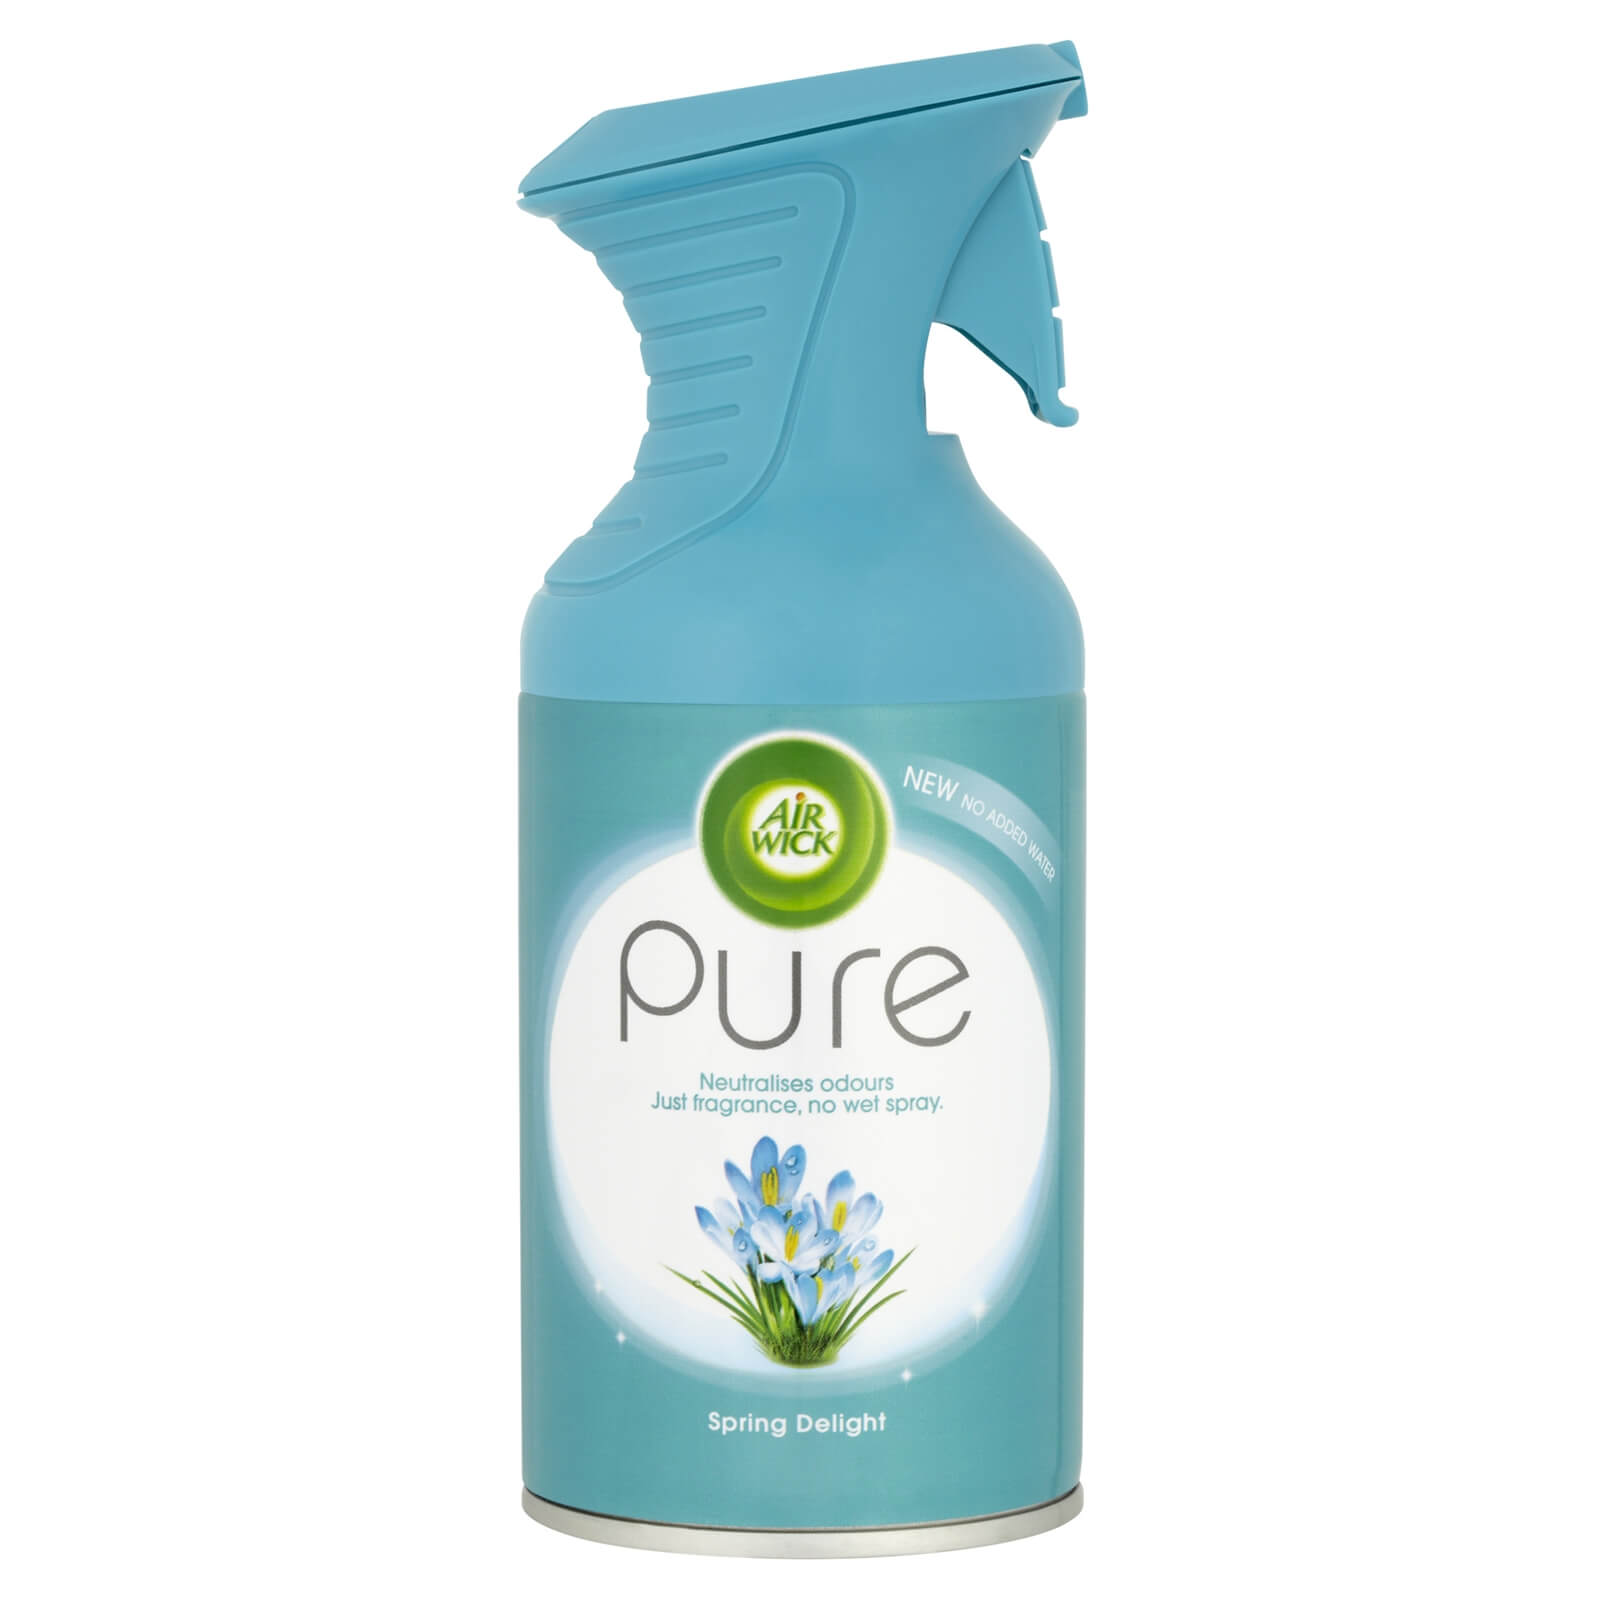 Airwick Pure Spring Delight Air Freshener 250ml